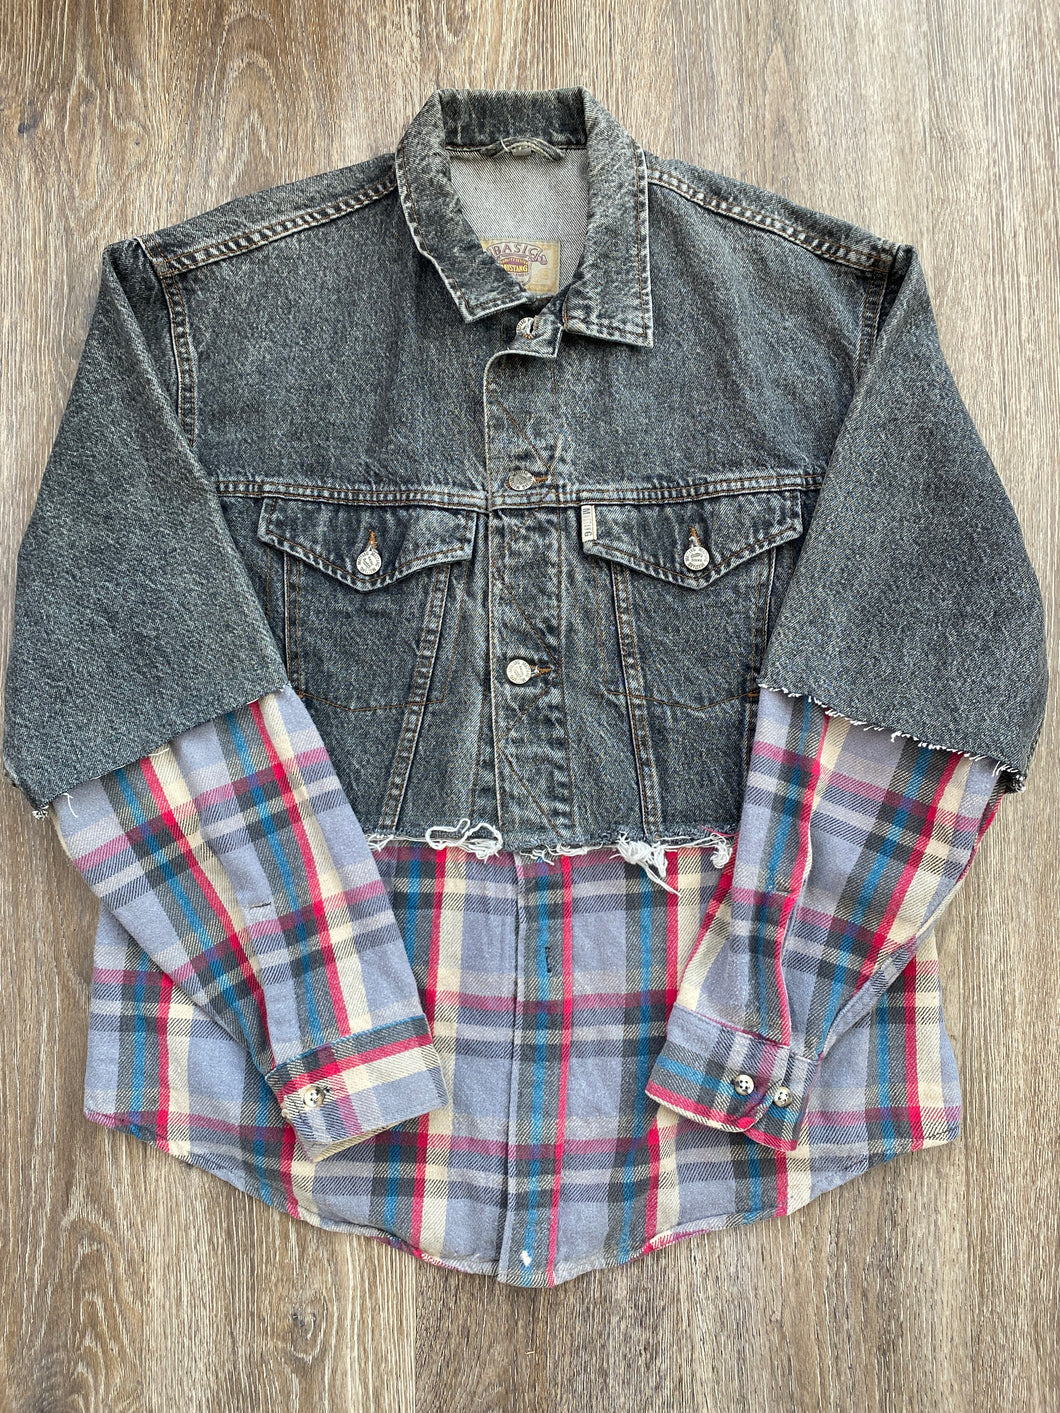 BTFBM Shacket Combines Denim and Plaid Flannel | Us Weekly